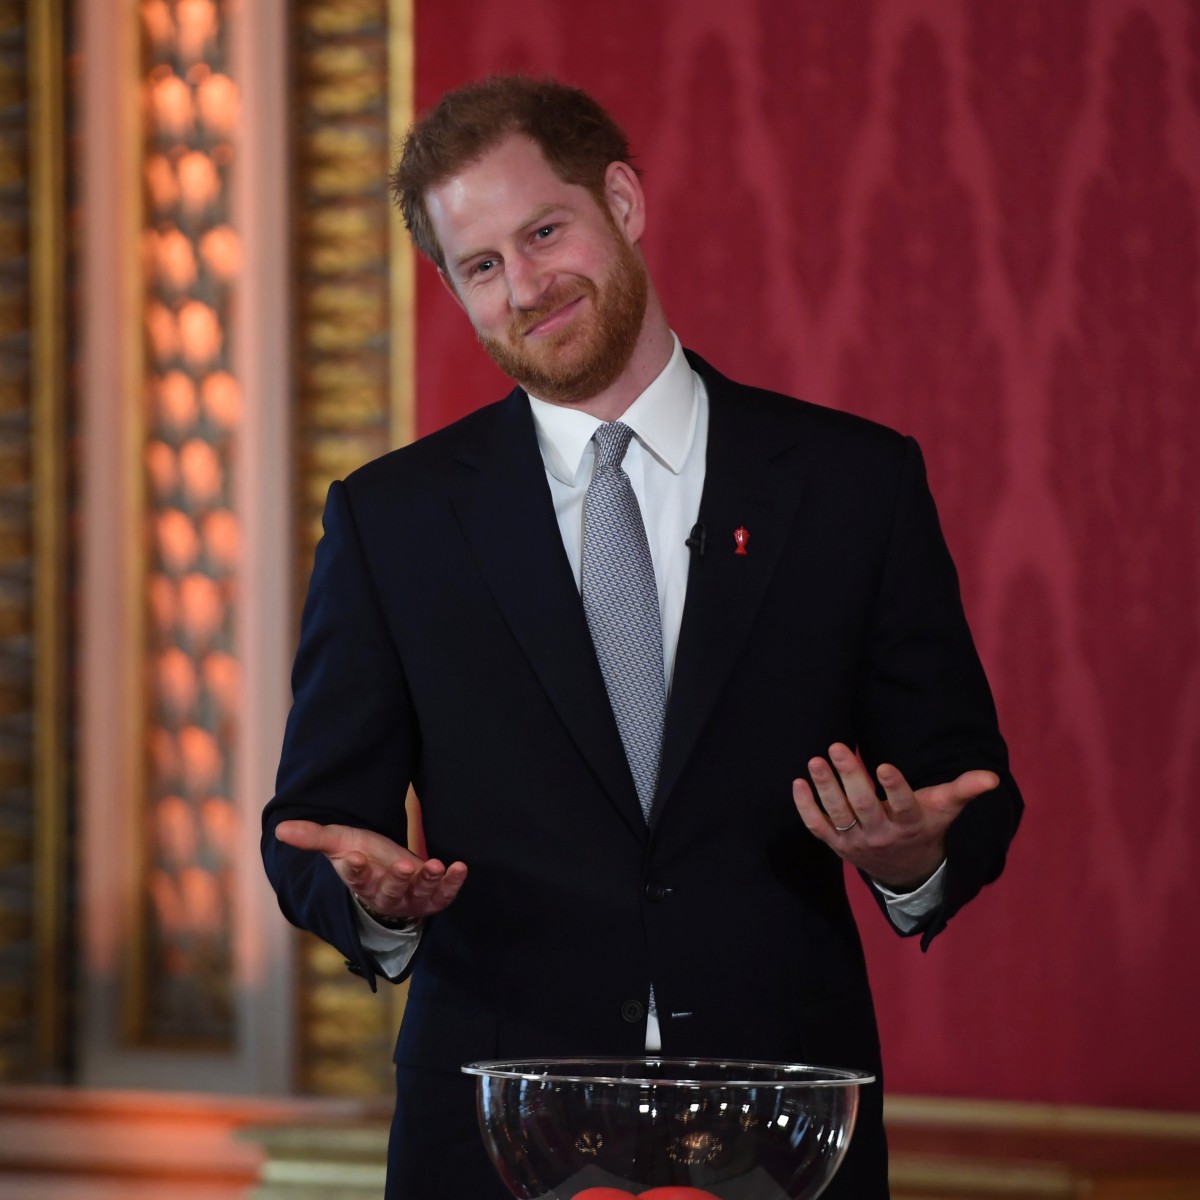 The Duke of Sussex is the patron of the Rugby Football League and was at Buckingham Palace for the ceremony